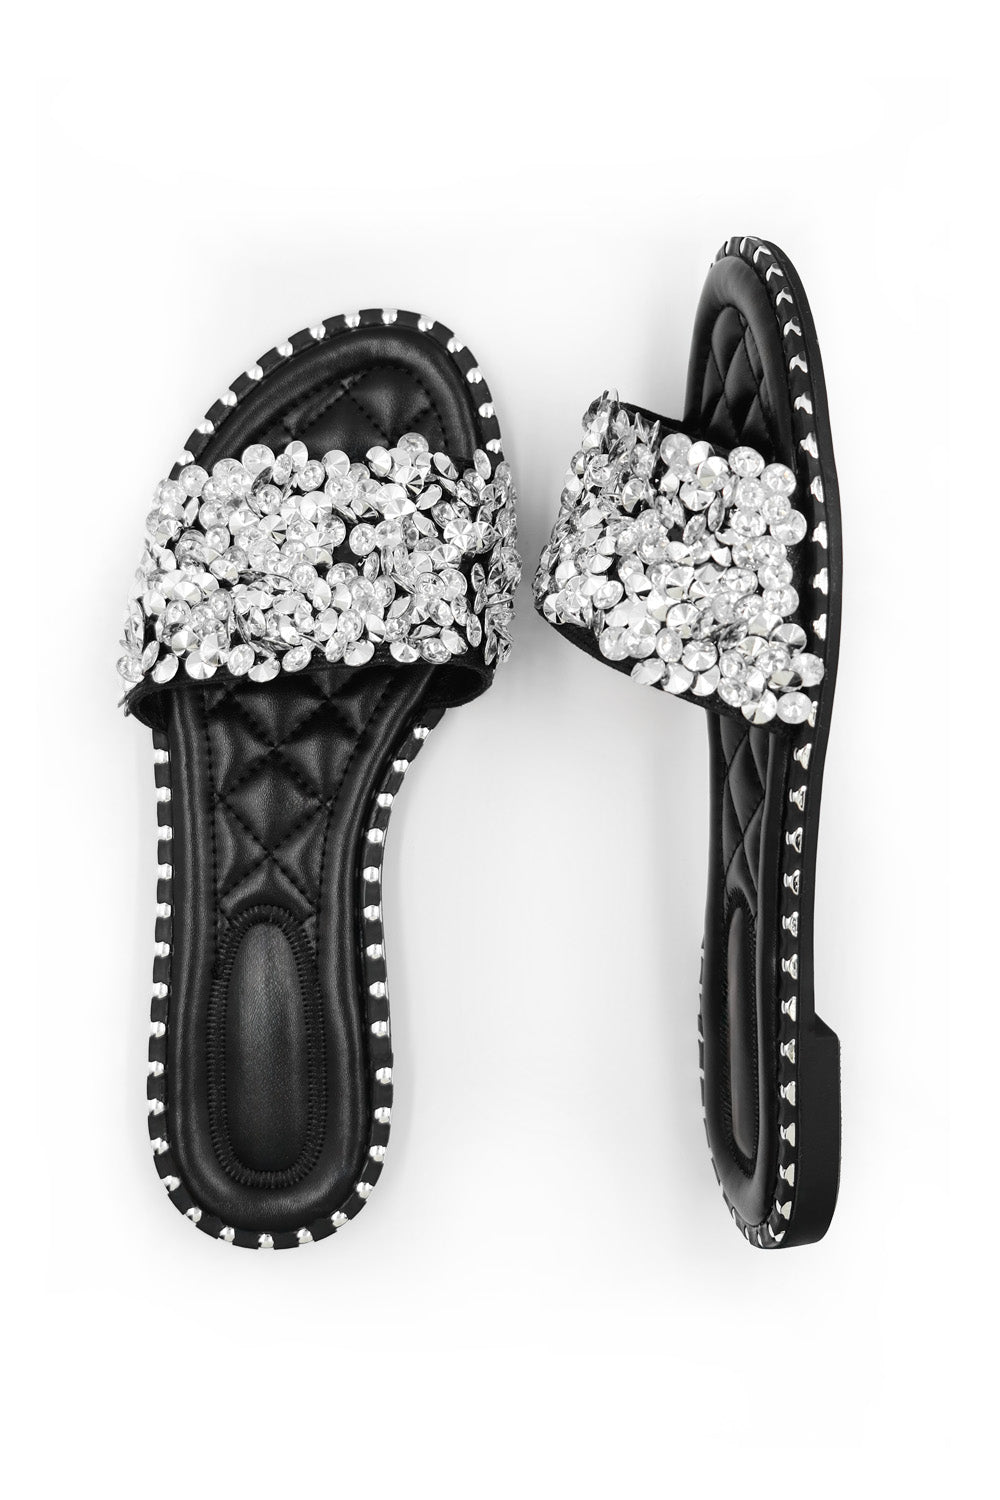 POPPY WIDE FIT DIAMANTE SPARKLY FLAT SLIDERS IN BLACK